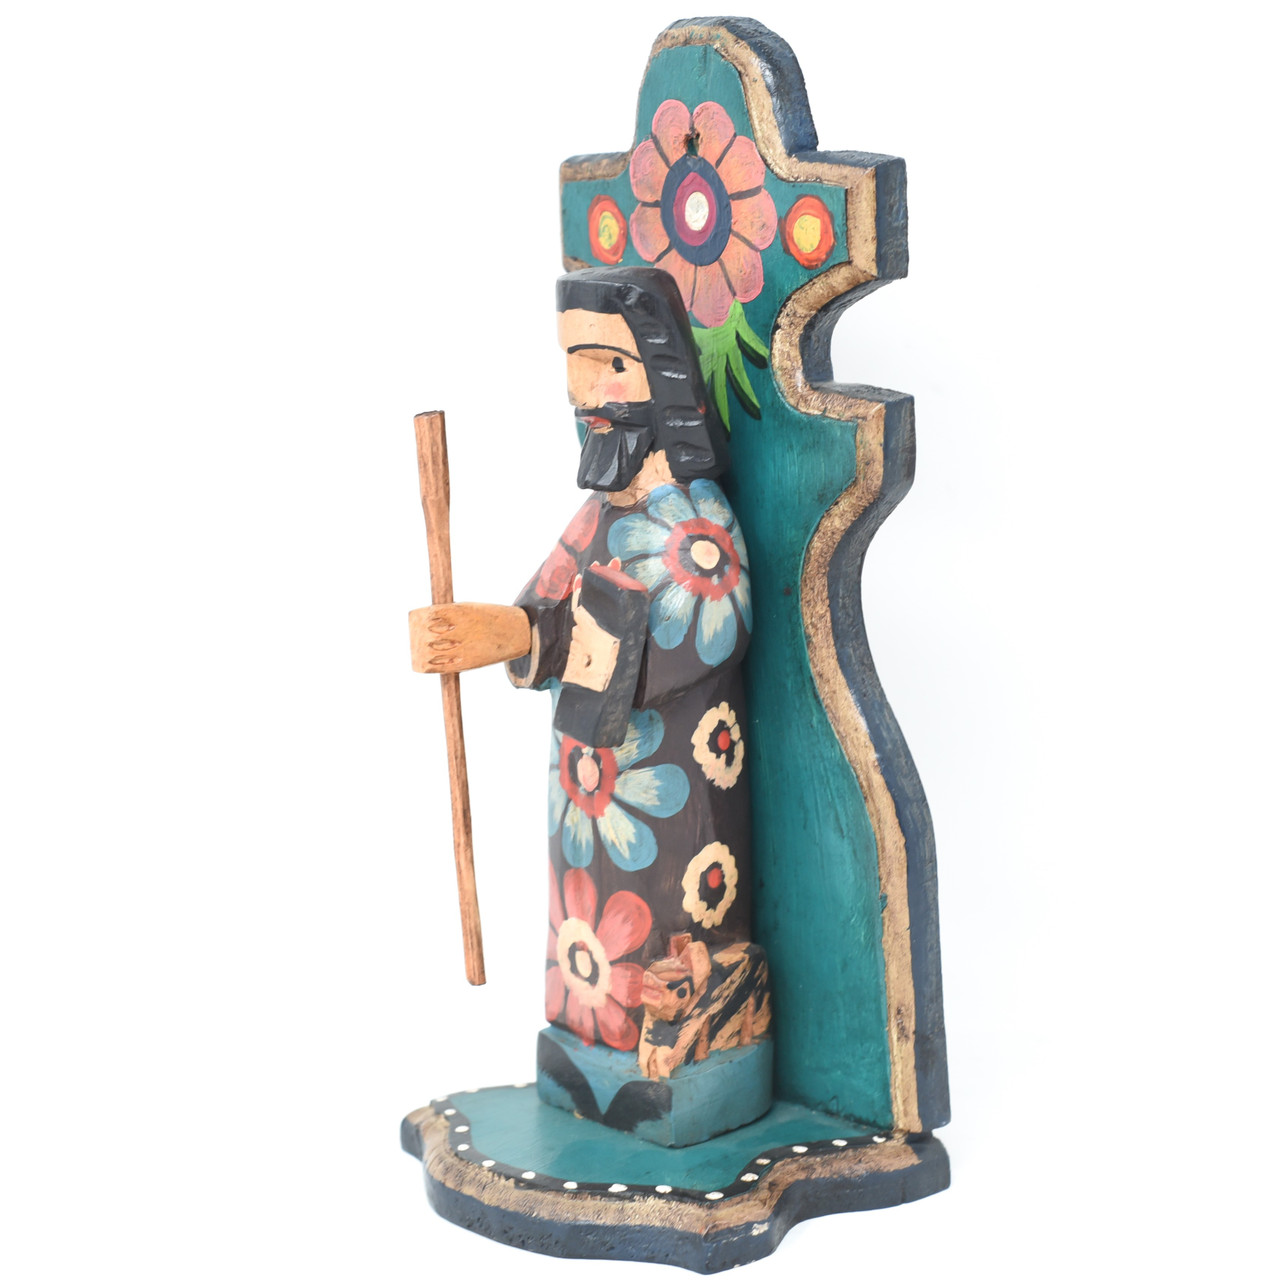 Jesus, Hand Carved  Blue Alter, made in Guatemala, 10.5" x 3.5" x 4"